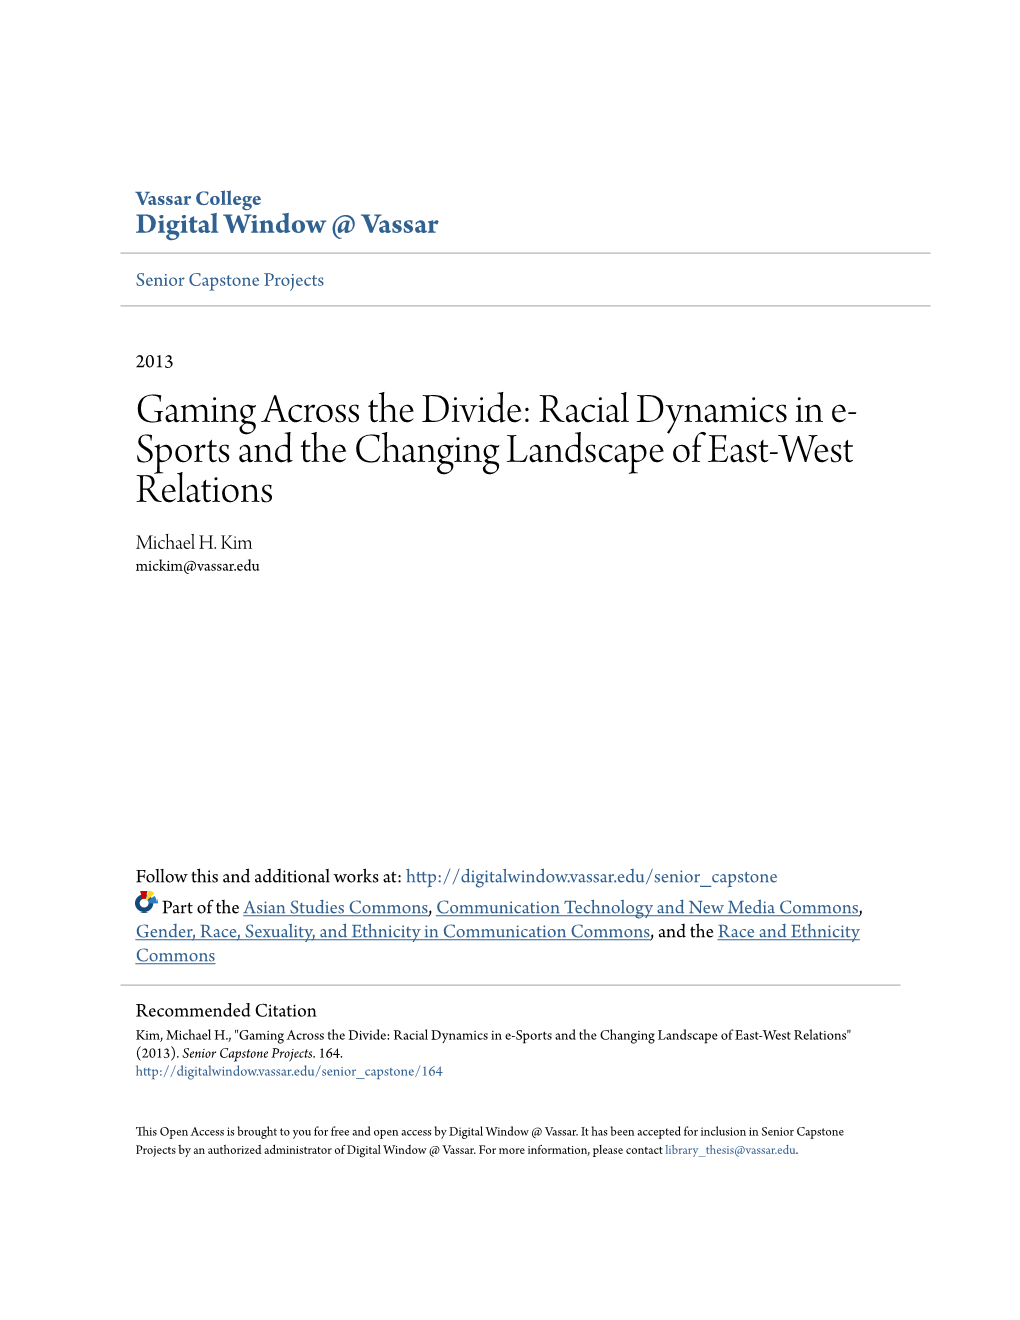 Gaming Across the Divide: Racial Dynamics in E- Sports and the Changing Landscape of East-West Relations Michael H